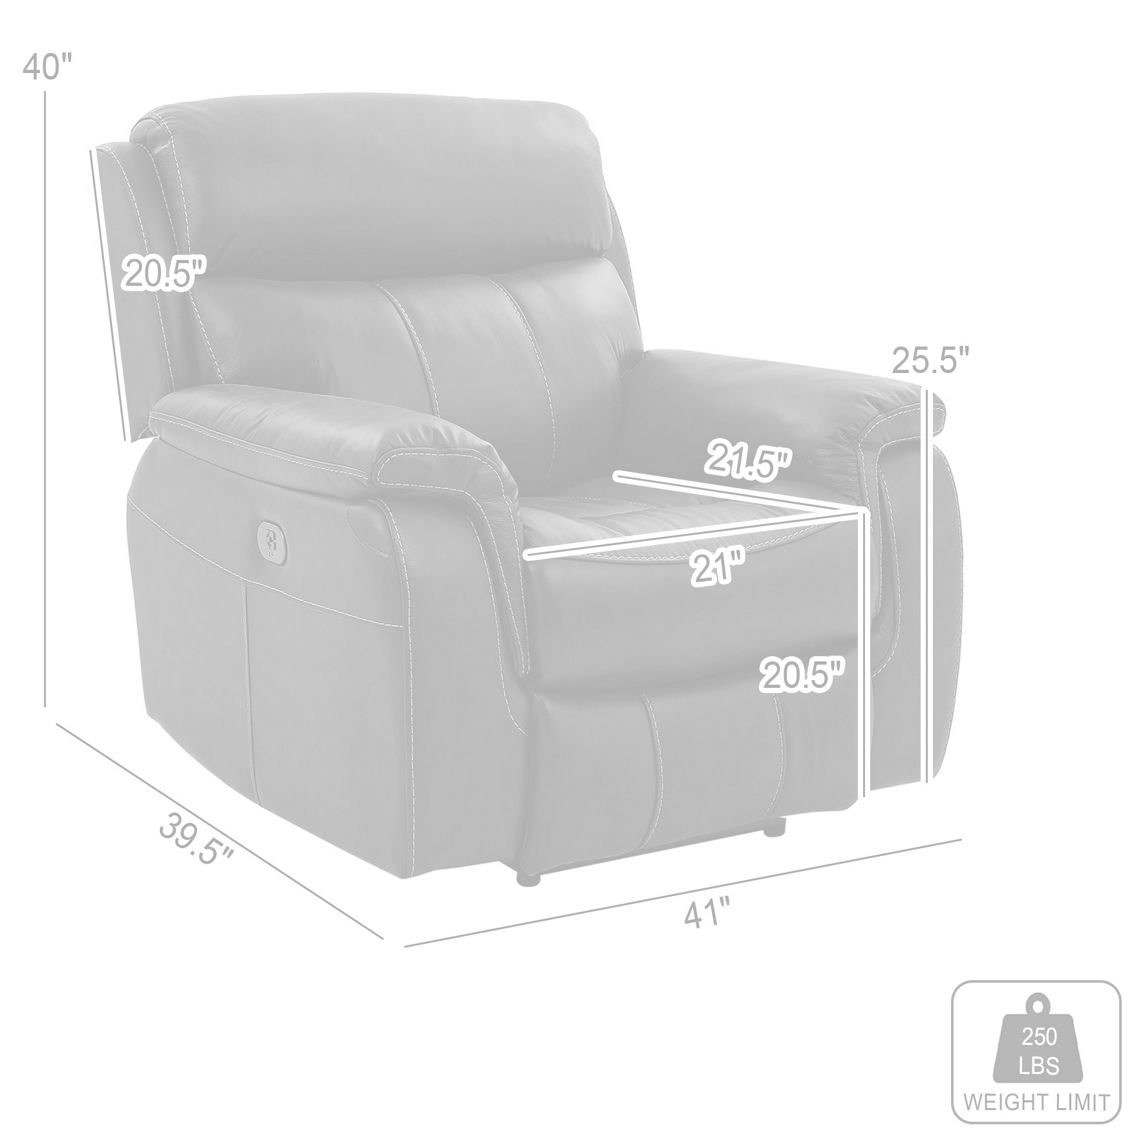 Armen Living Montague Dual Power Headrest and Lumbar Support Leather Recliner - Image 2 of 9